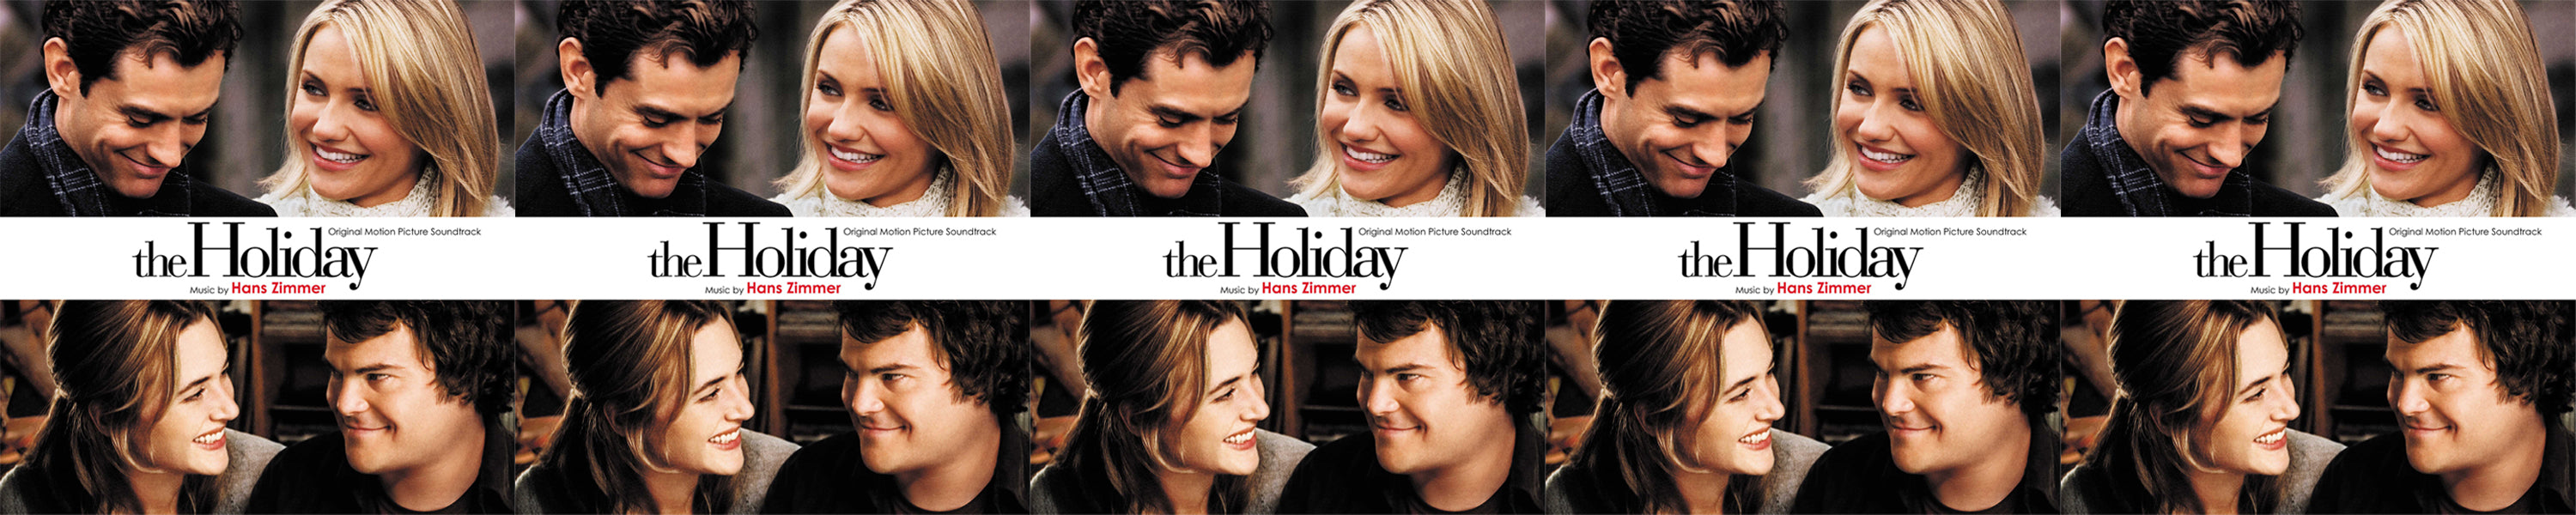 The Holiday & Hans Zimmer #movies #hanszimmer #theholiday